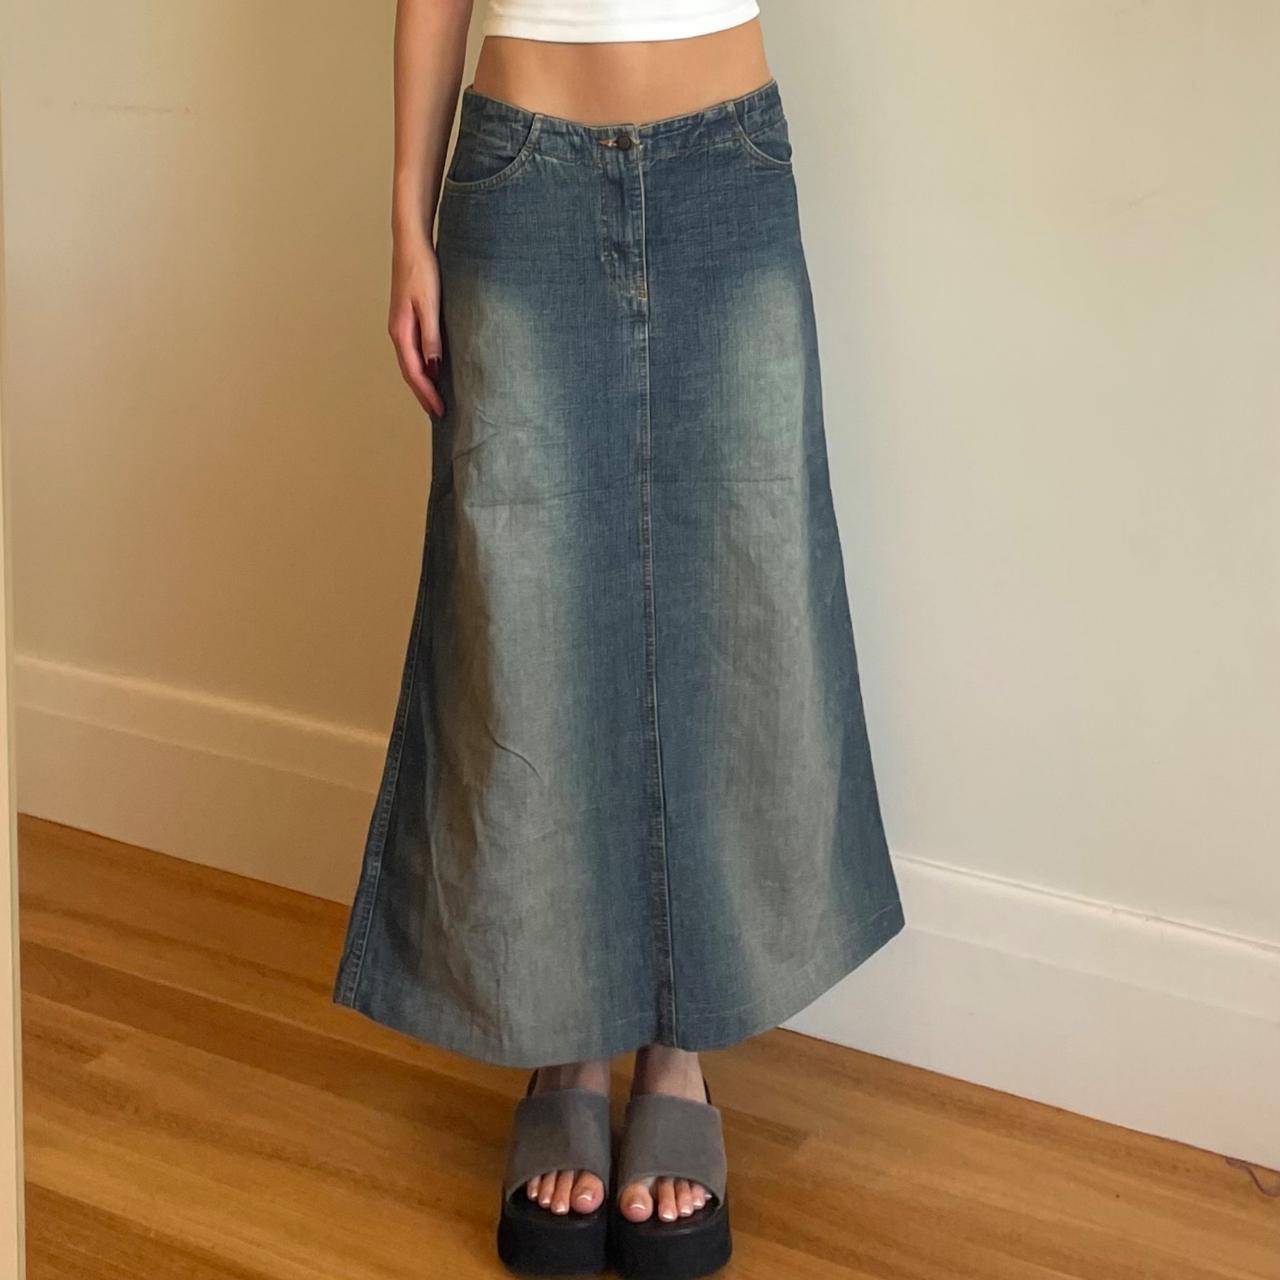 gorgeous vintage denim maxi skirt ️‍🔥 from Onyx low to... - Depop